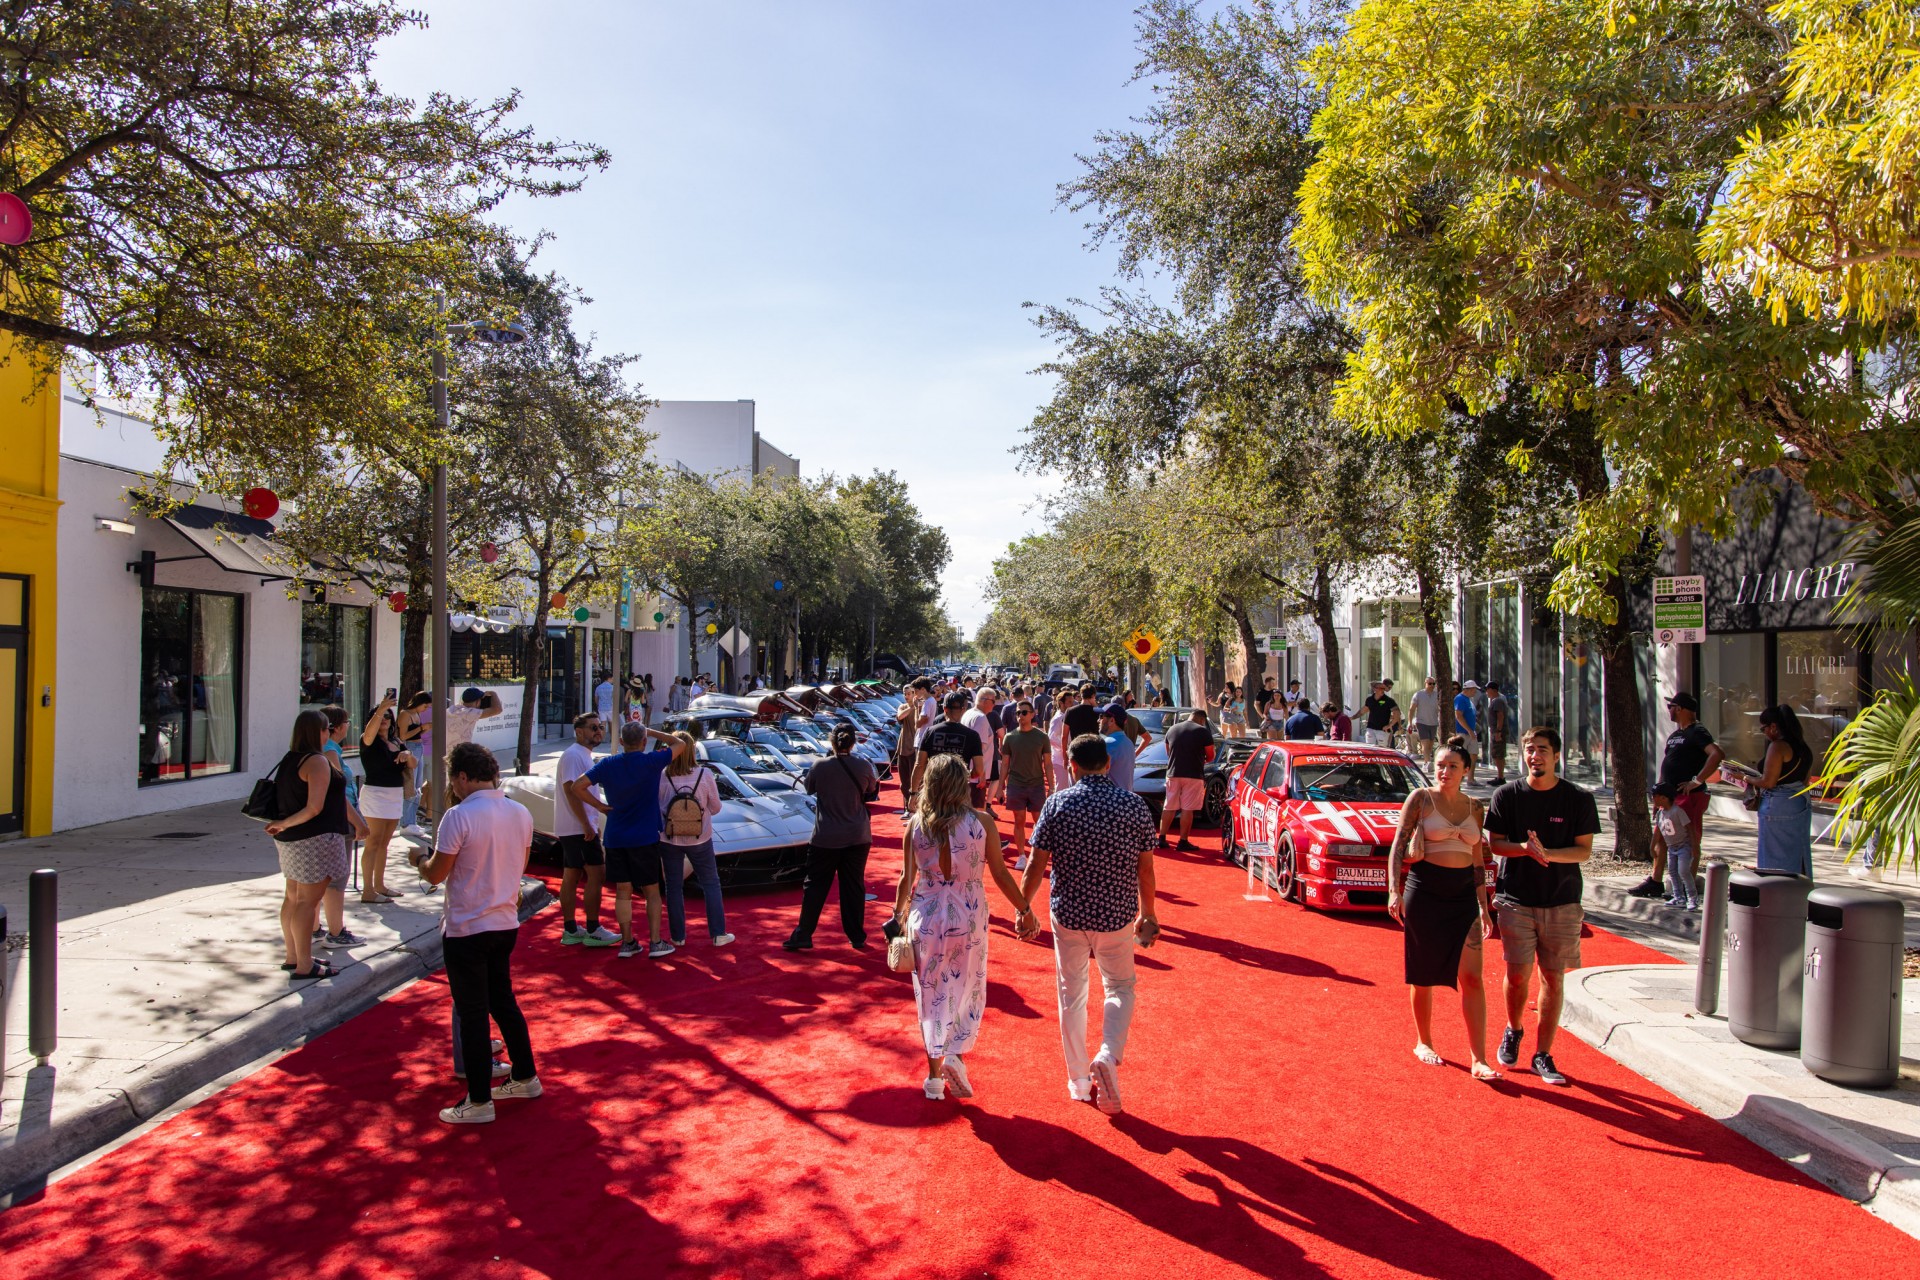 The Sixth Annual Miami Concours